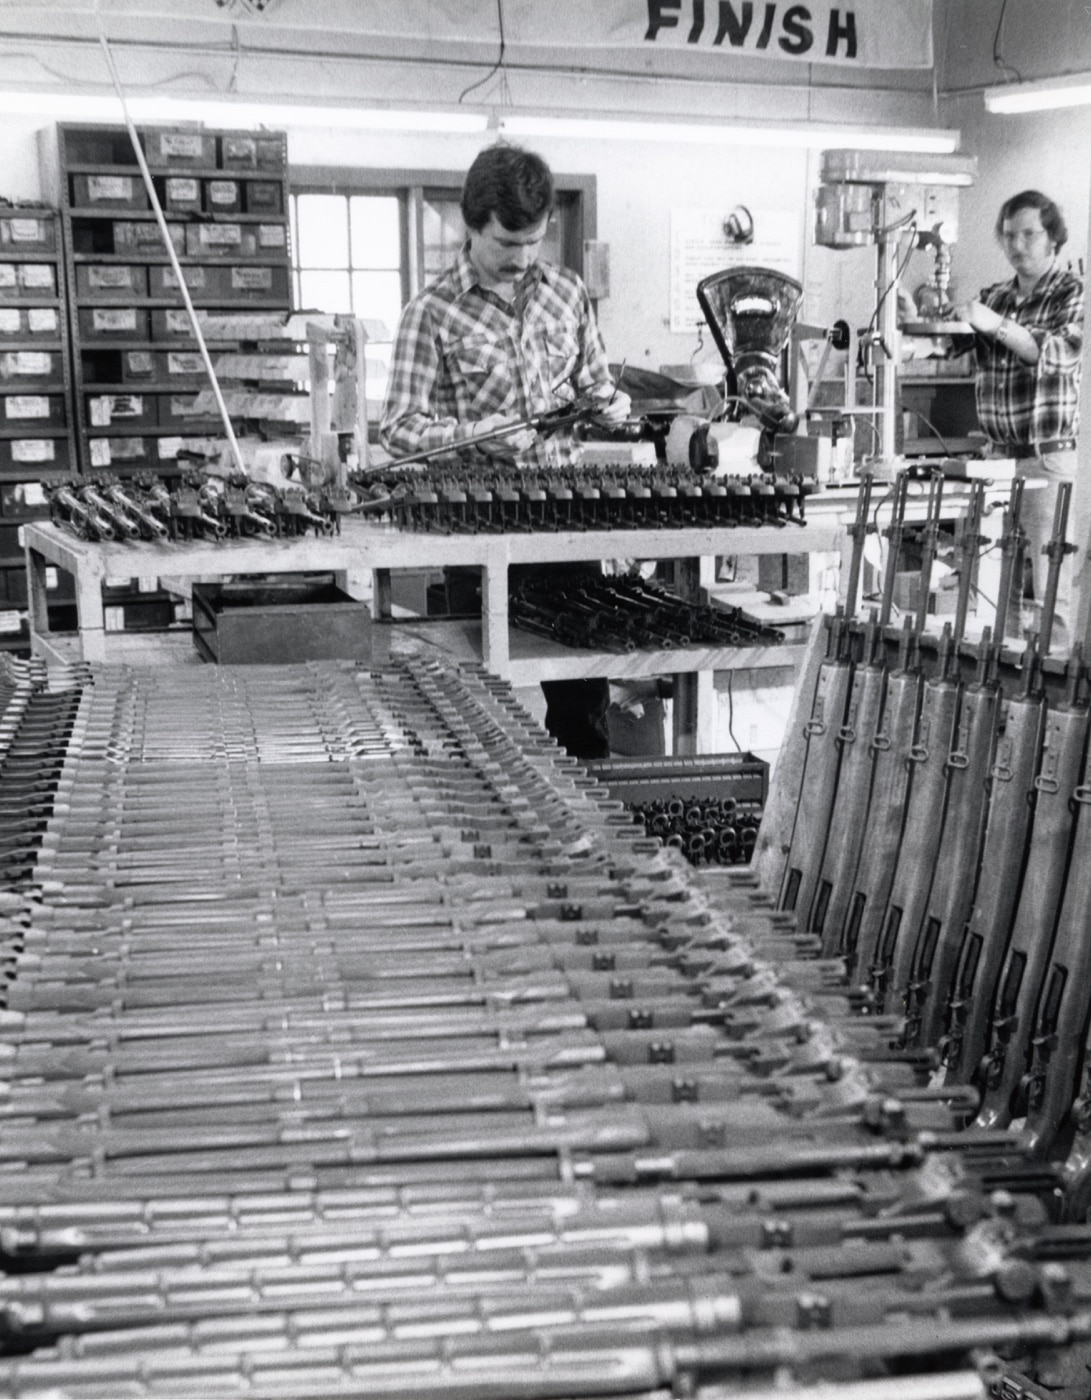 Denny Reese building M1A rifles